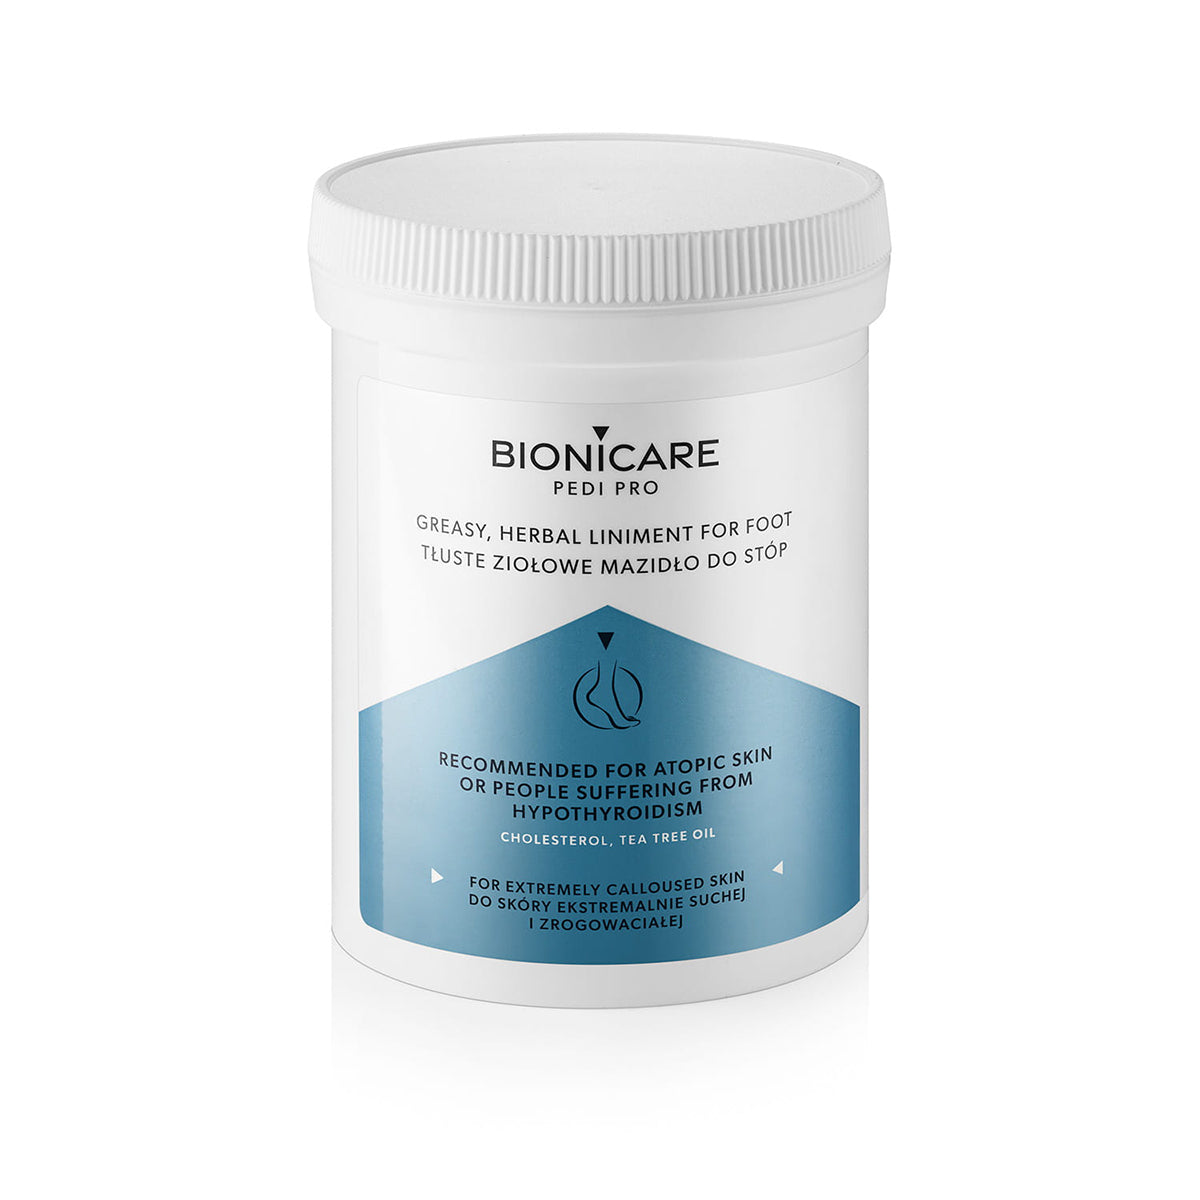 BIONICARE OILY HERBAL FOOT BUTTER 200ml